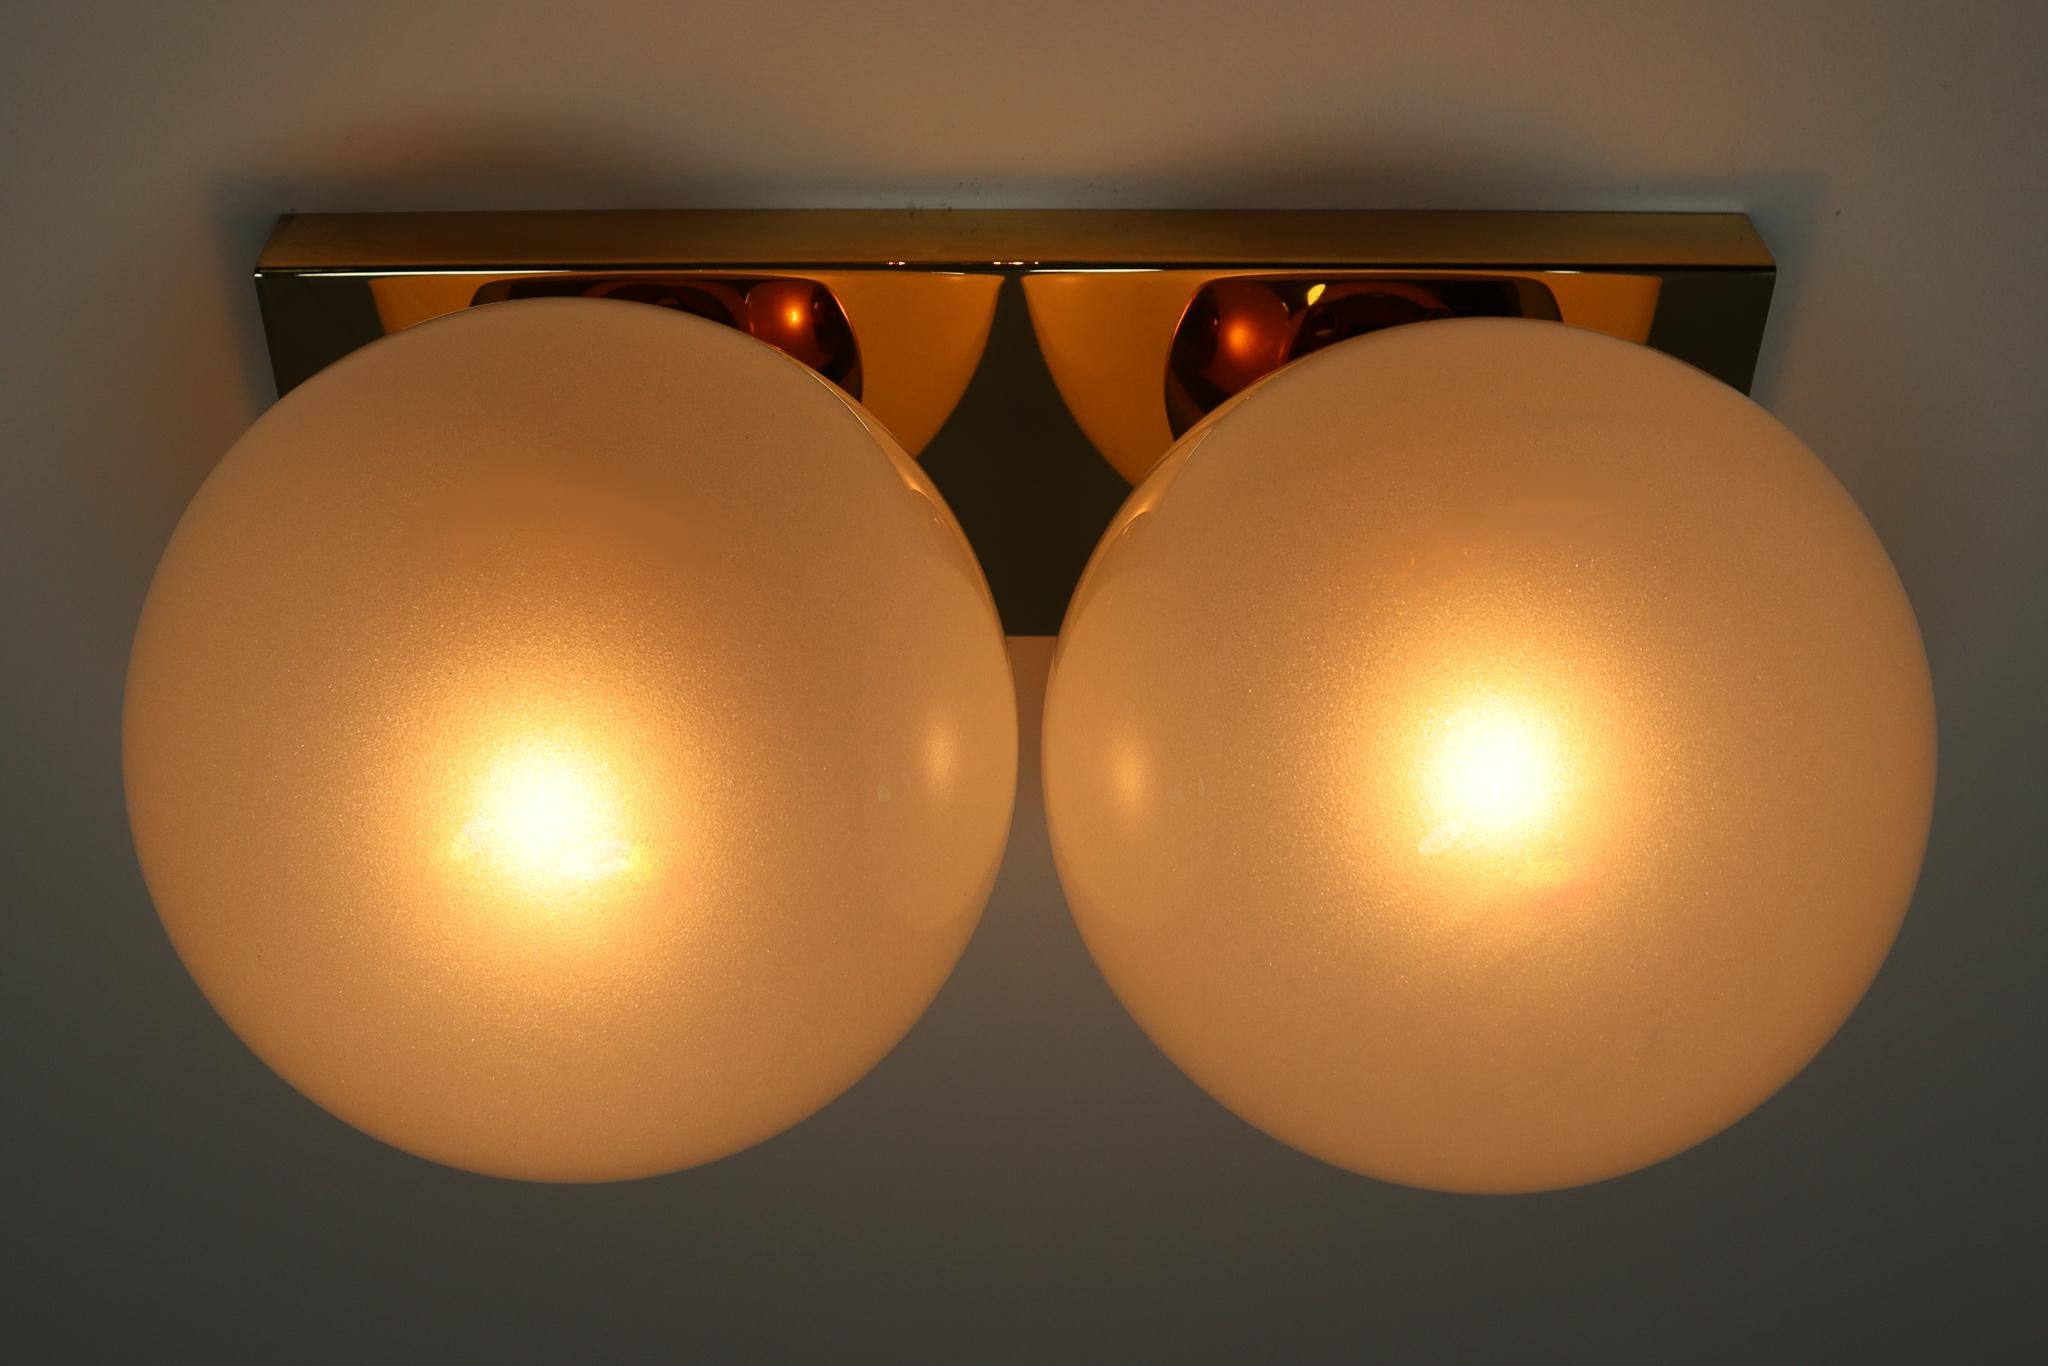 European Mid-20th Century Brass Wall/Ceiling Lights White Frosted Glass Globes, 1960s For Sale